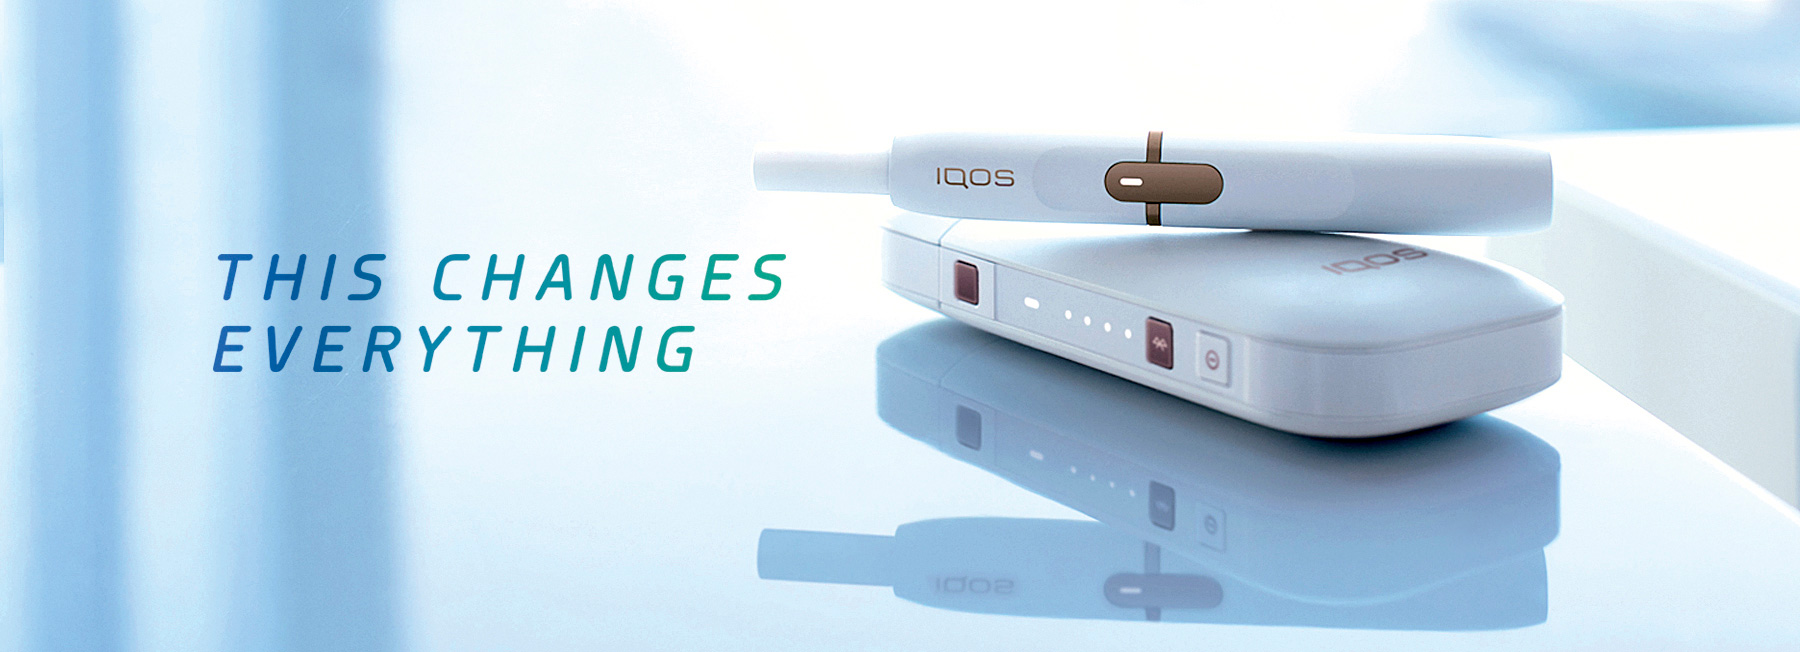 Phillip Morris International promotes IQOS HEETS as exempt from